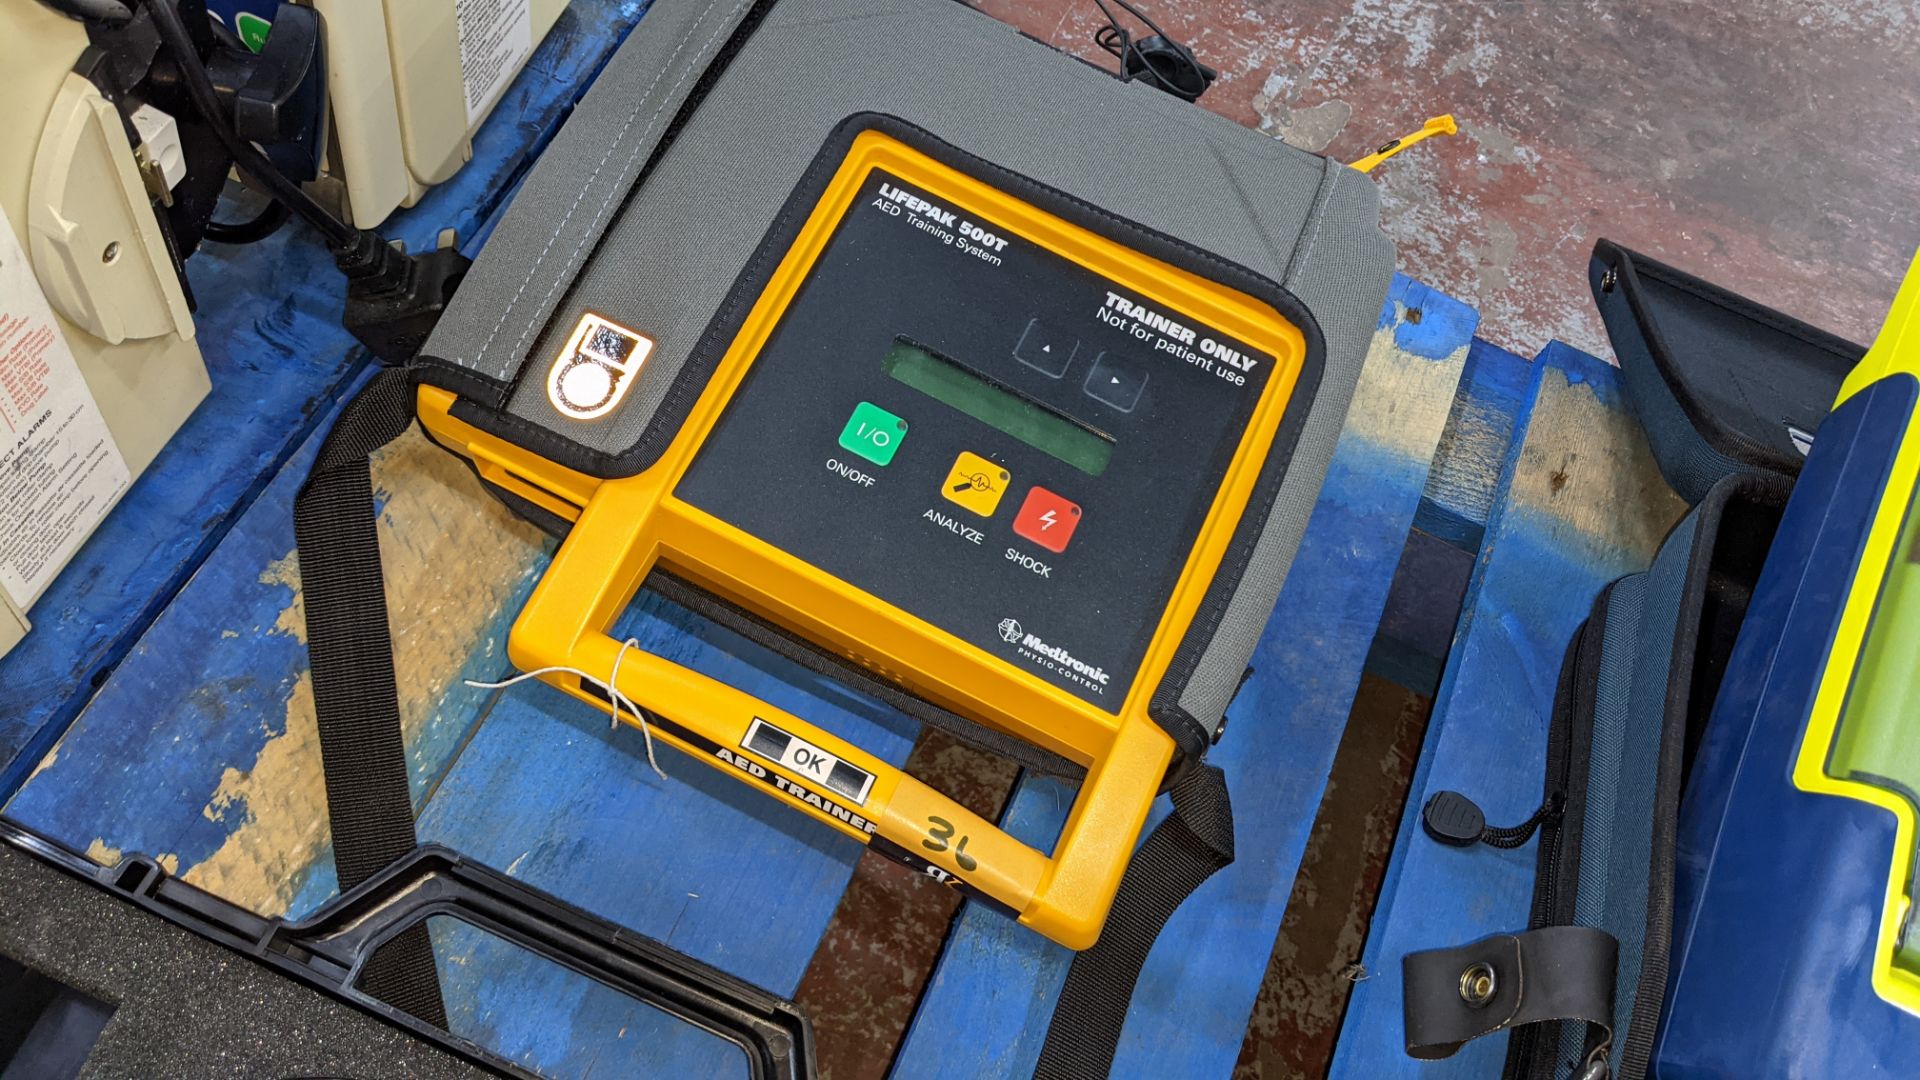 Medtronic Lifepak 500T AED training system (trainer only, not for patient use), including case & anc - Image 7 of 7